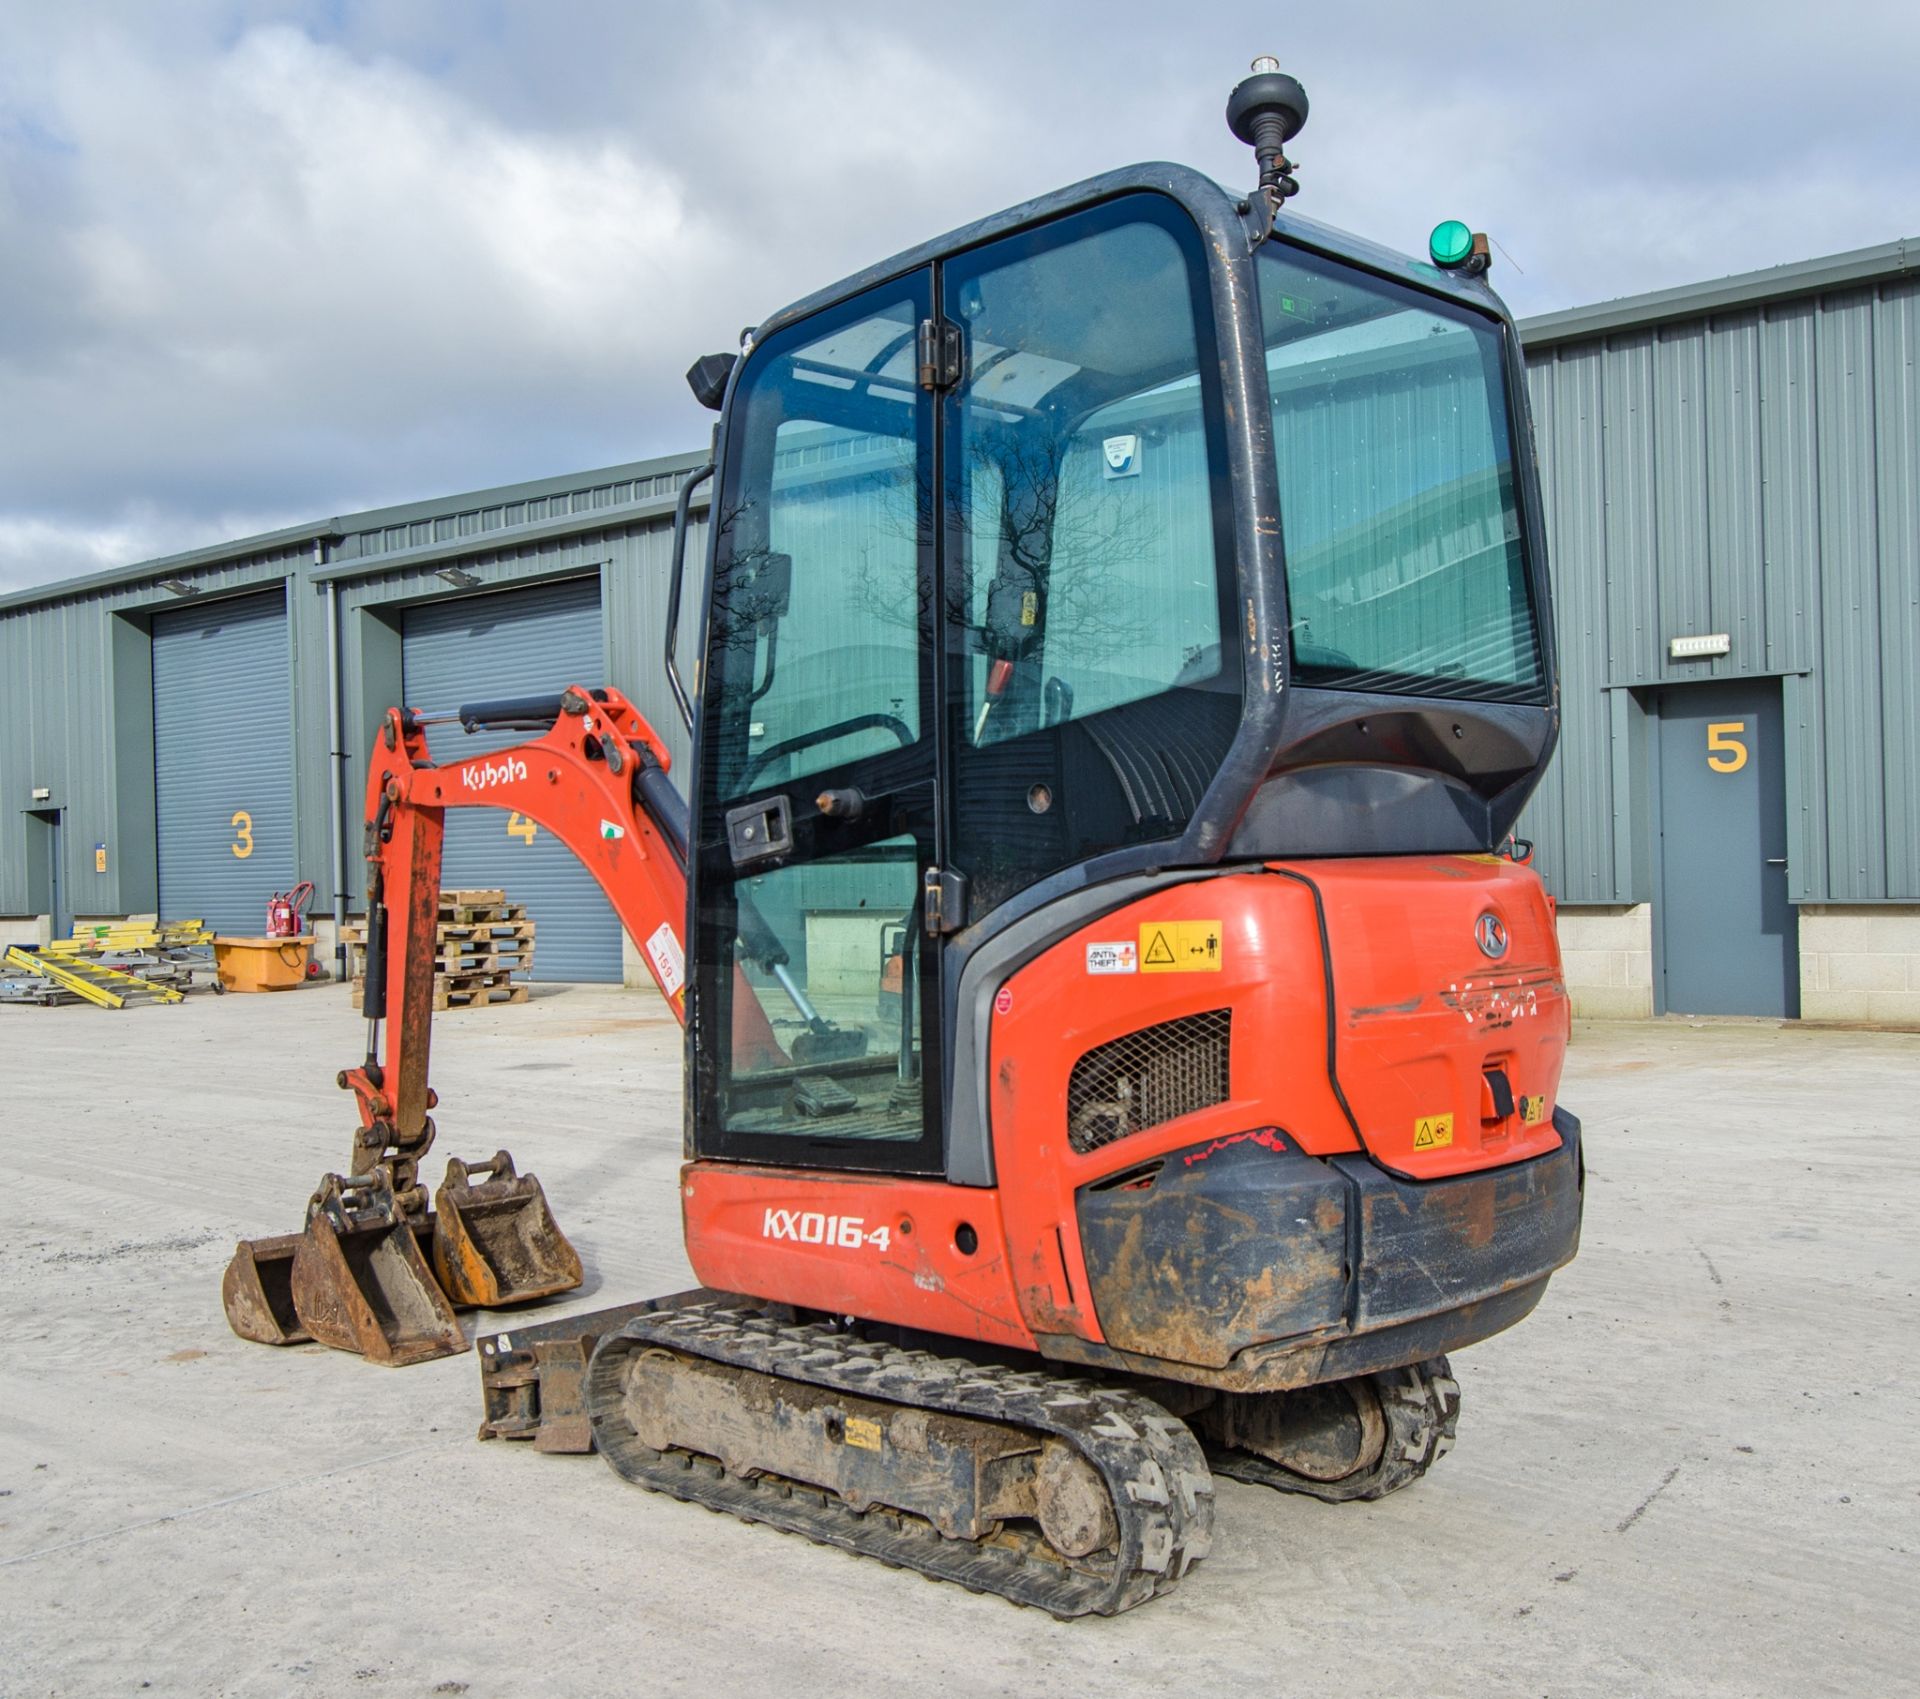 Kubota KX016-4 1.5 tonne rubber tracked excavator Year: 2017 S/N: 61044 Recorded Hours: 2260 - Image 4 of 26